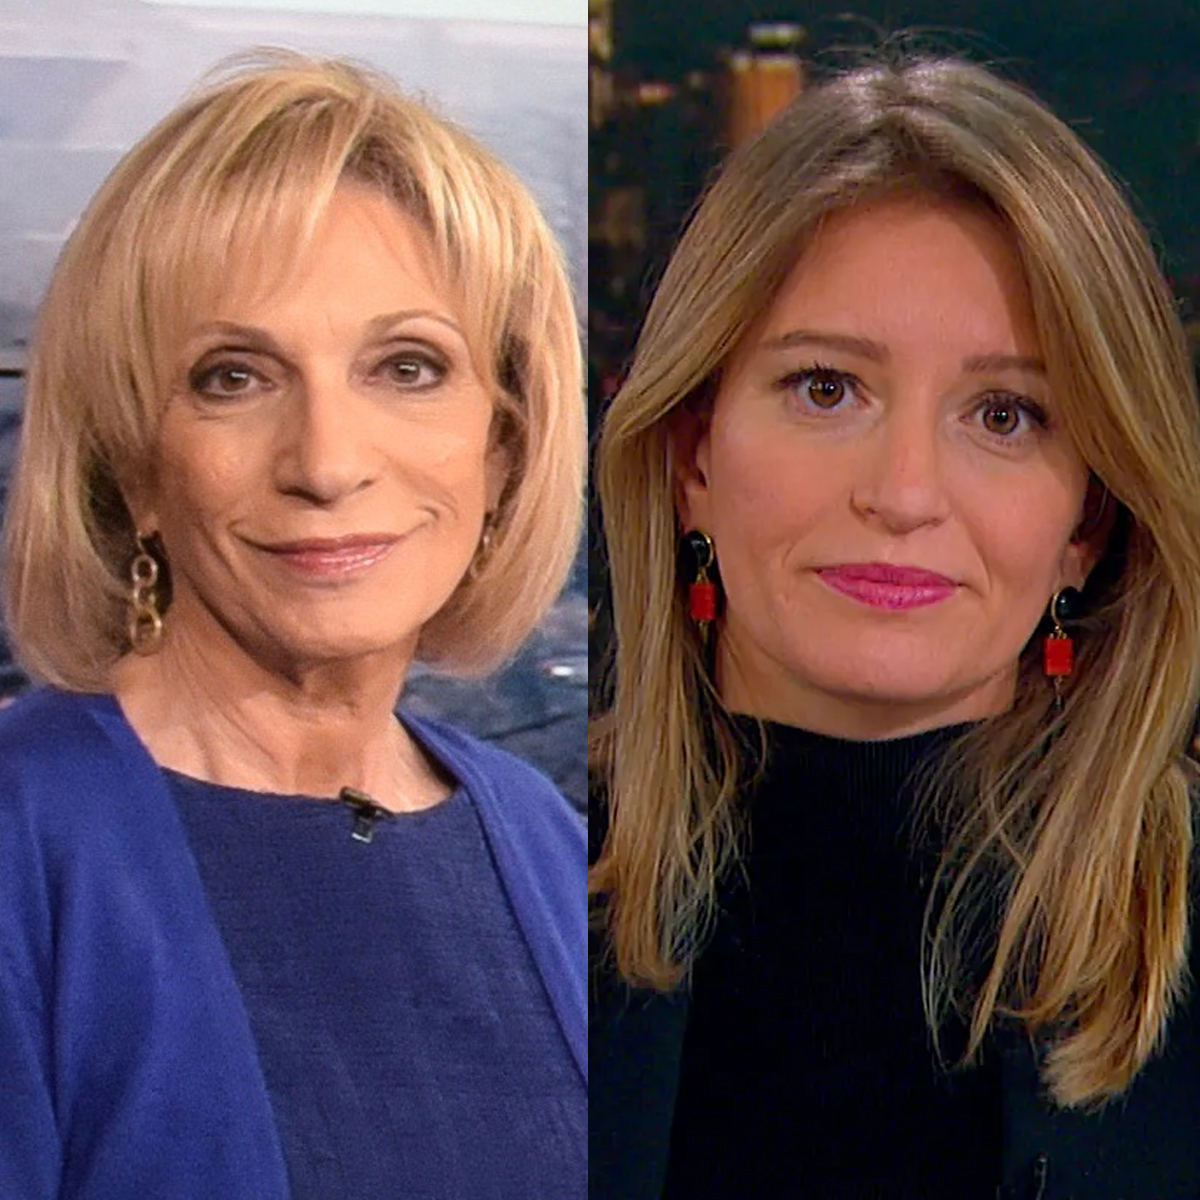 Dear @MSNBC, Your entire block of midday programming, starting with Andrea Mitchell and ending with Katy Tur, is horrible and highly unwatchable. It forces me to change the channel, and sometimes just turn the TV off entirely. I am not alone in this opinion. Their coverage of